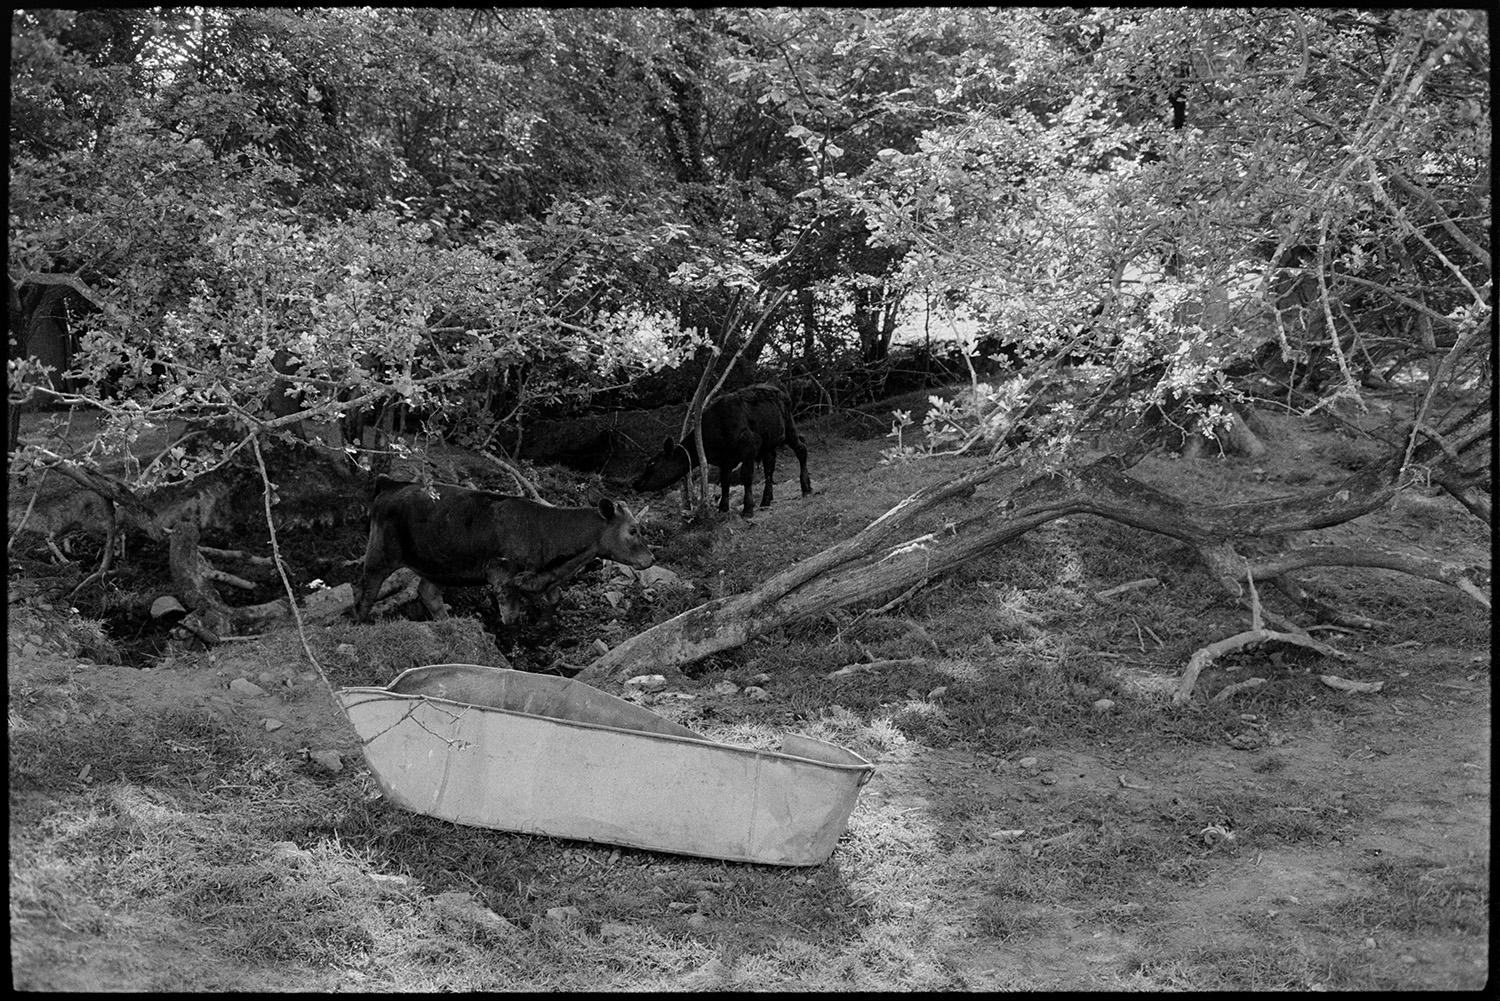 Old tin bath amongst trees.
[Two cows under trees on the edge of a stream running through a field at Ashwell, Dolton. An old tin bath is visible in the field in the foreground.]